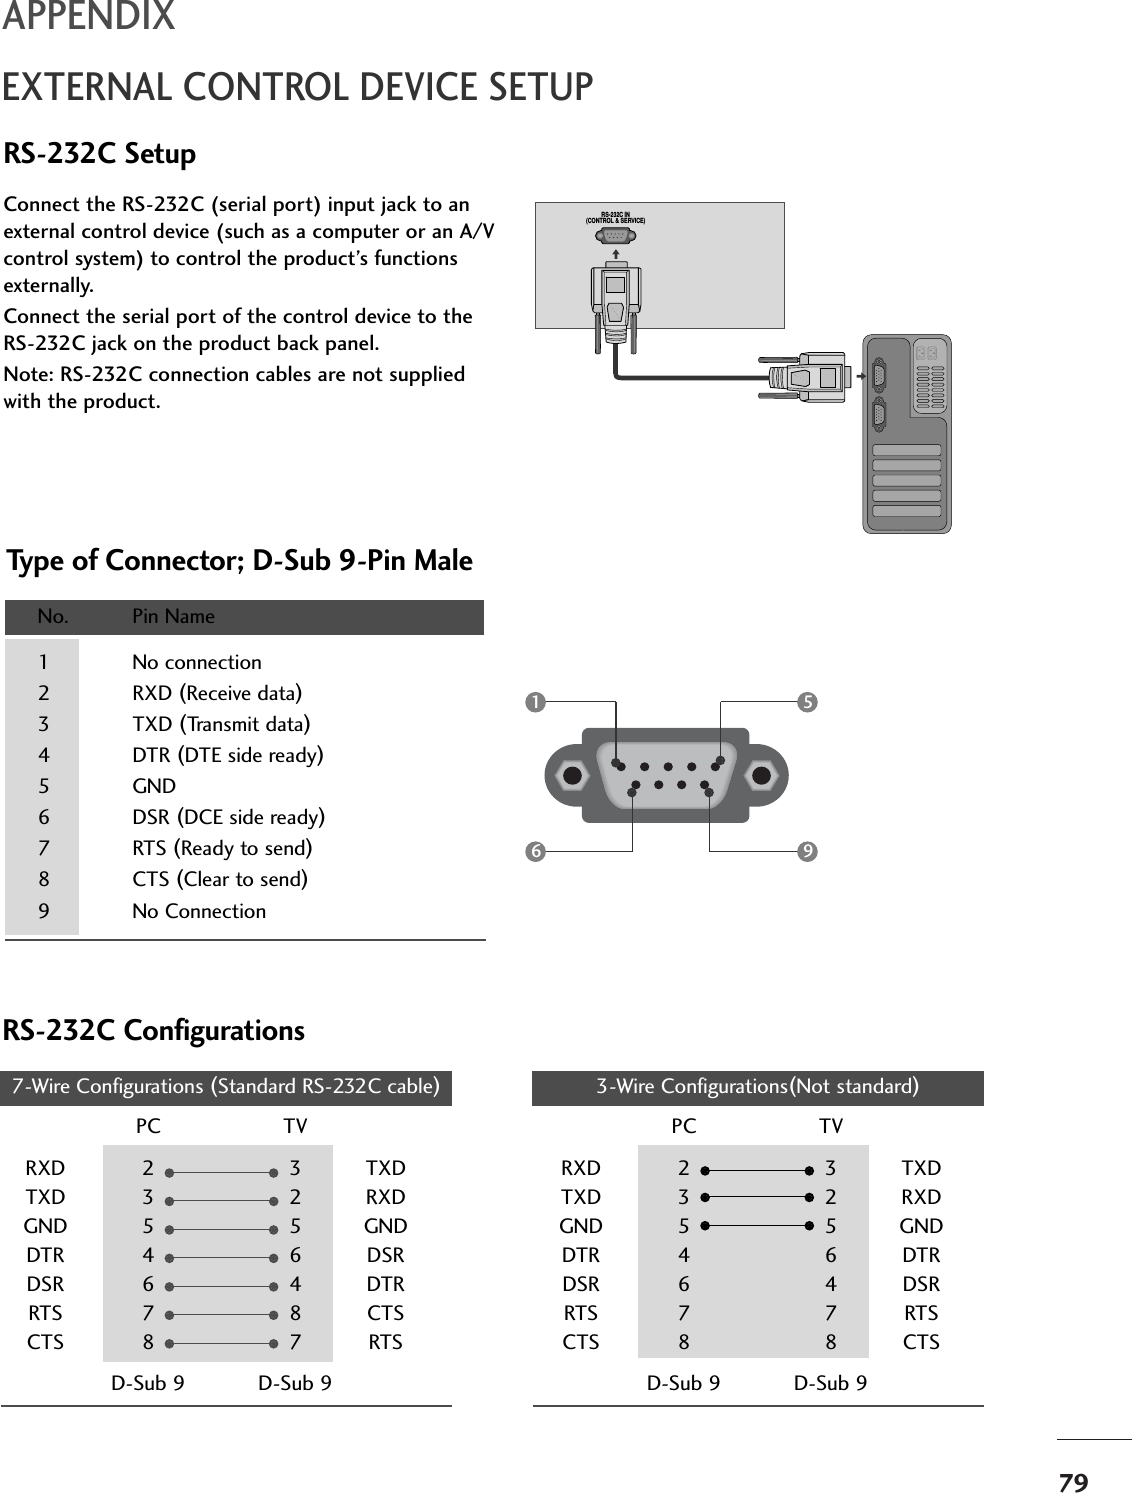 79APPENDIXEXTERNAL CONTROL DEVICE SETUPRS-232C SetupConnect the RS-232C (serial port) input jack to anexternal control device (such as a computer or an A/Vcontrol system) to control the product’s functionsexternally.Connect the serial port of the control device to theRS-232C jack on the product back panel.Note: RS-232C connection cables are not suppliedwith the product.Type of Connector; D-Sub 9-Pin MaleNo. Pin Name1 No connection2 RXD (Receive data)3 TXD (Transmit data)4DTR (DTE side ready)5 GND6 DSR (DCE side ready)7 RTS (Ready to send)8 CTS (Clear to send)9 No ConnectionRS-232C IN(CONTROL &amp; SERVICE)1 56 9RS-232C Configurations7-Wire Configurations (Standard RS-232C cable)PC TVRXD 2 3 TXDTXD 3 2 RXDGND 5 5 GNDDTR 4 6 DSRDSR 6 4 DTRRTS 7 8 CTSCTS 8 7 RTSD-Sub 9 D-Sub 93-Wire Configurations(Not standard)PC TVRXD 2 3 TXDTXD 3 2 RXDGND 5 5 GNDDTR 4 6 DTRDSR 6 4 DSRRTS 7 7 RTSCTS 8 8 CTSD-Sub 9 D-Sub 9